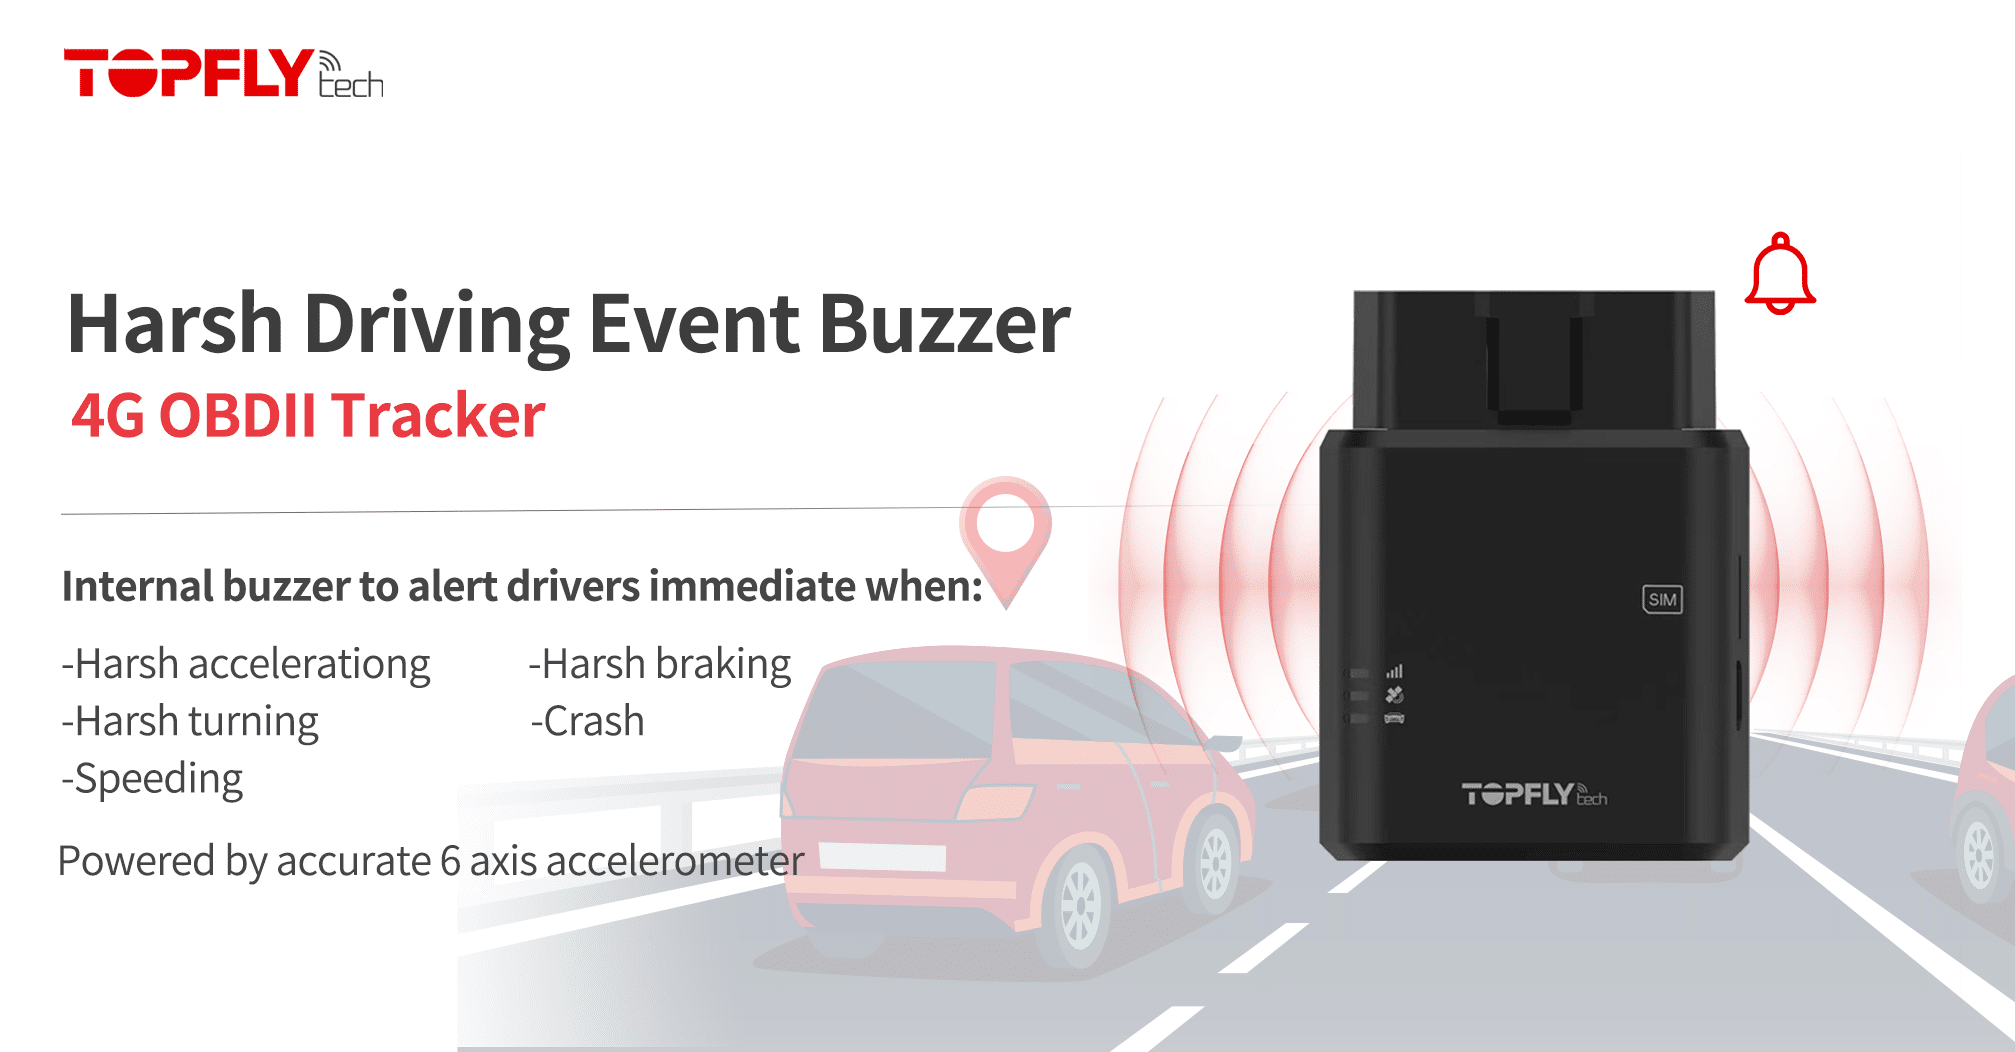 Internal Buzzer for Harsh Driving Events